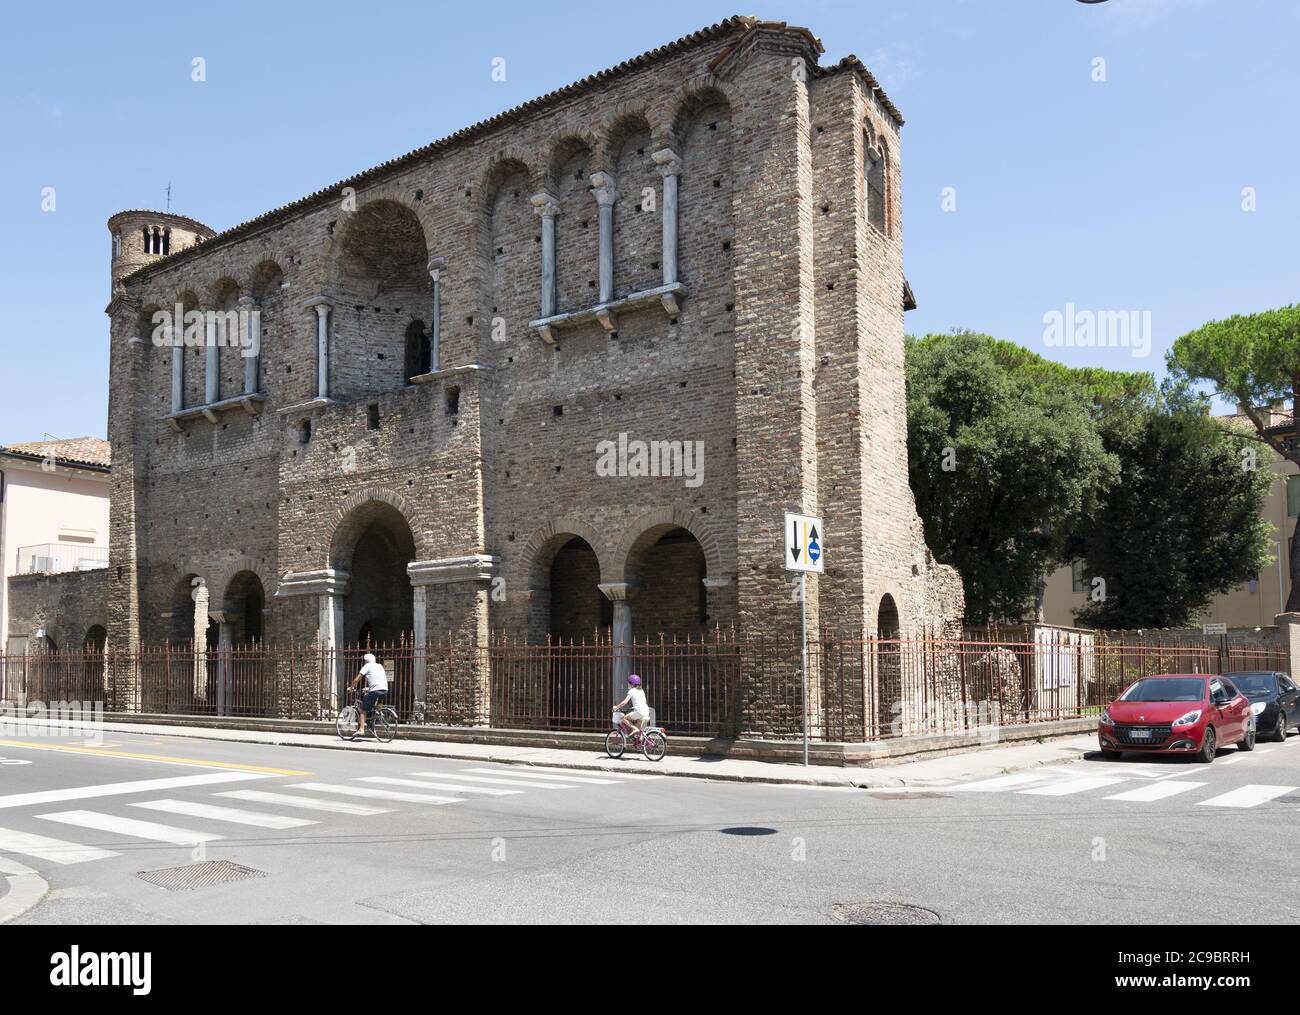 An esternal view of  Palace of Theodoric in Ravenna, Italy Stock Photo